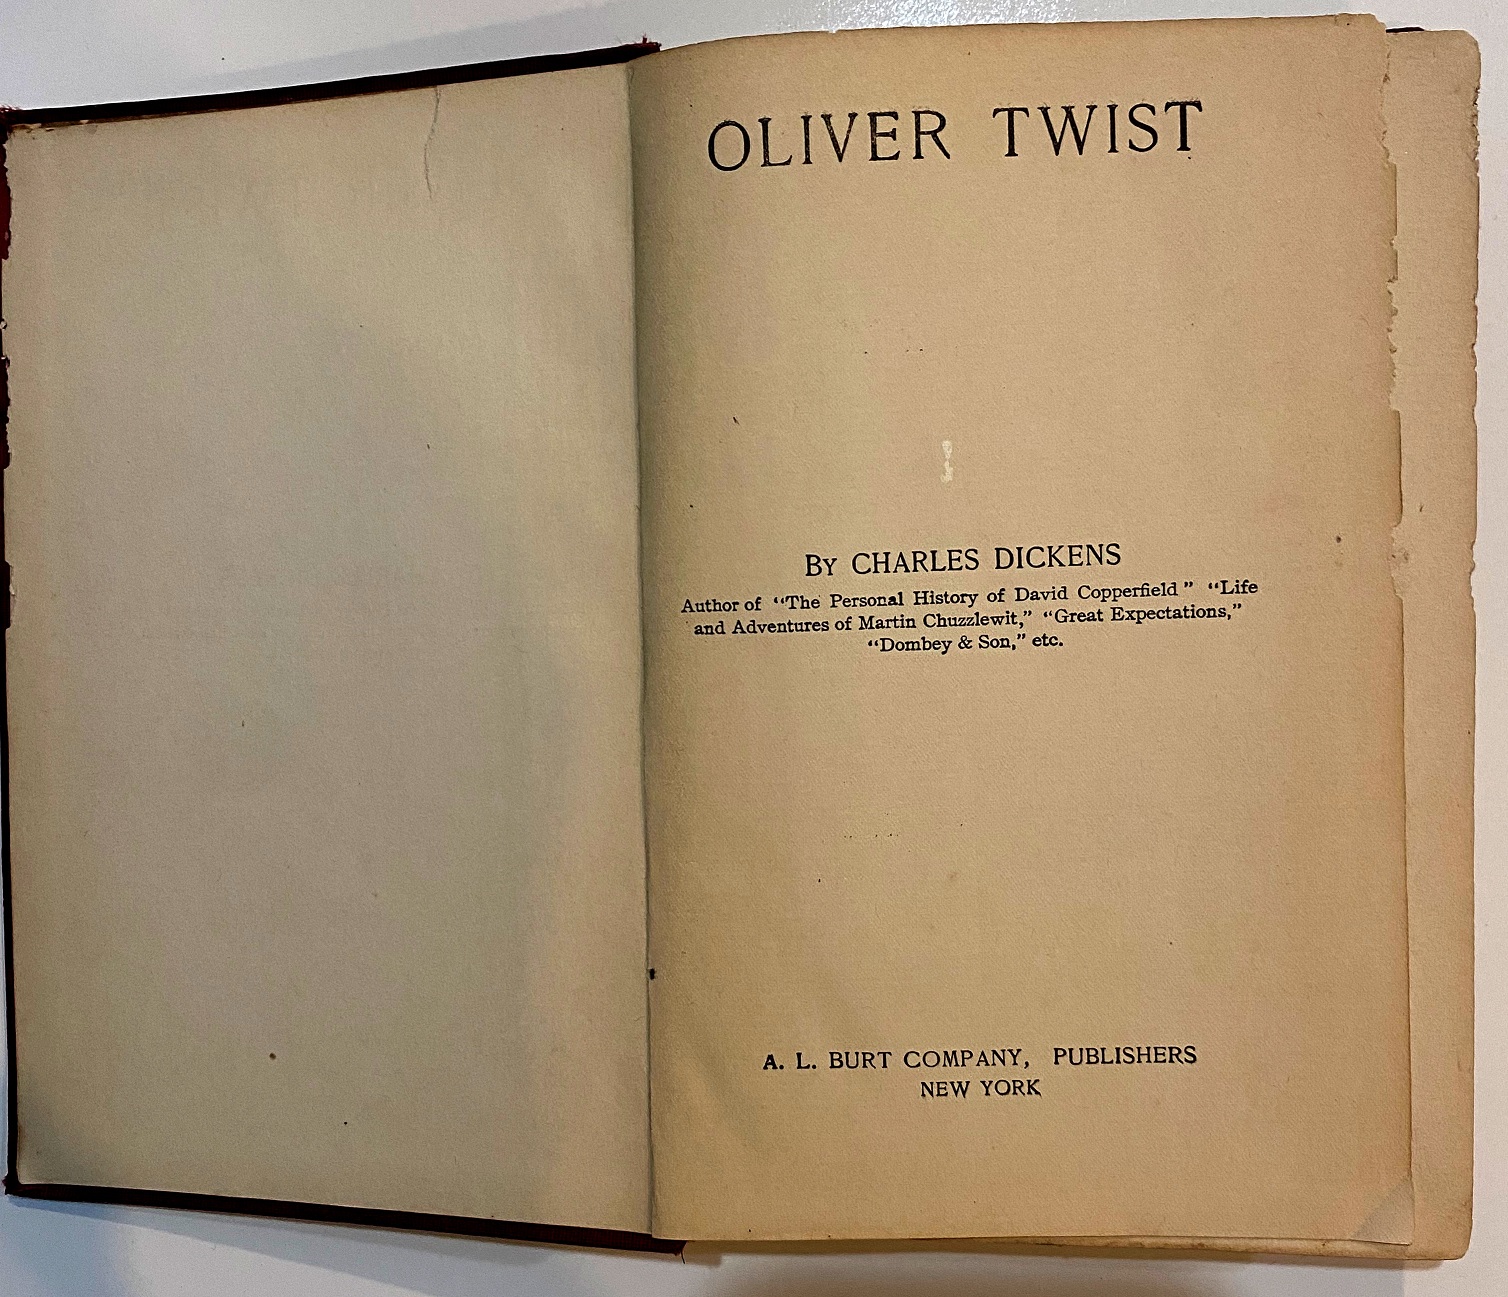  Step into the World of Victorian England with Charles Dickens' Timeless Classic | Oliver Twist.